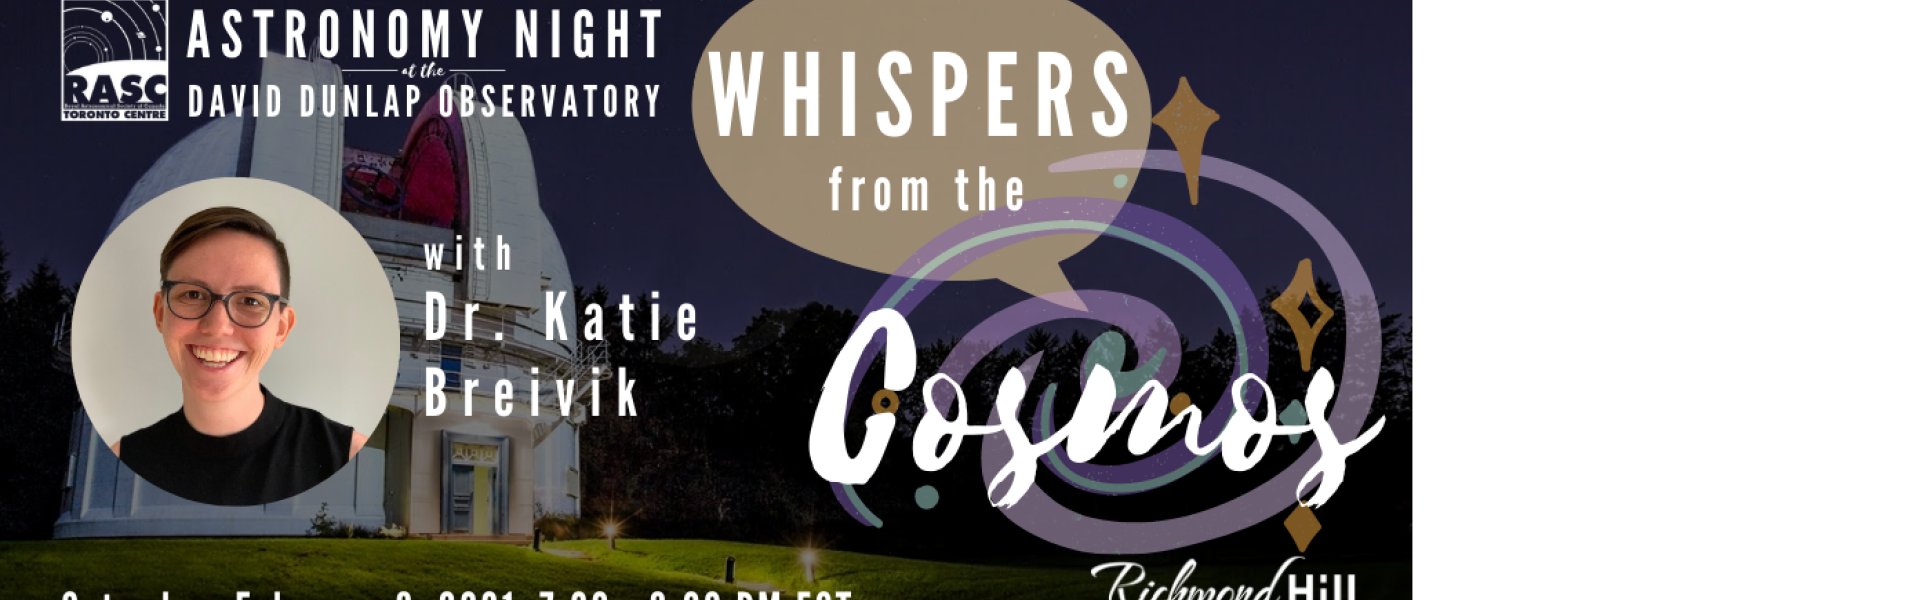 Whispers From the Cosmos